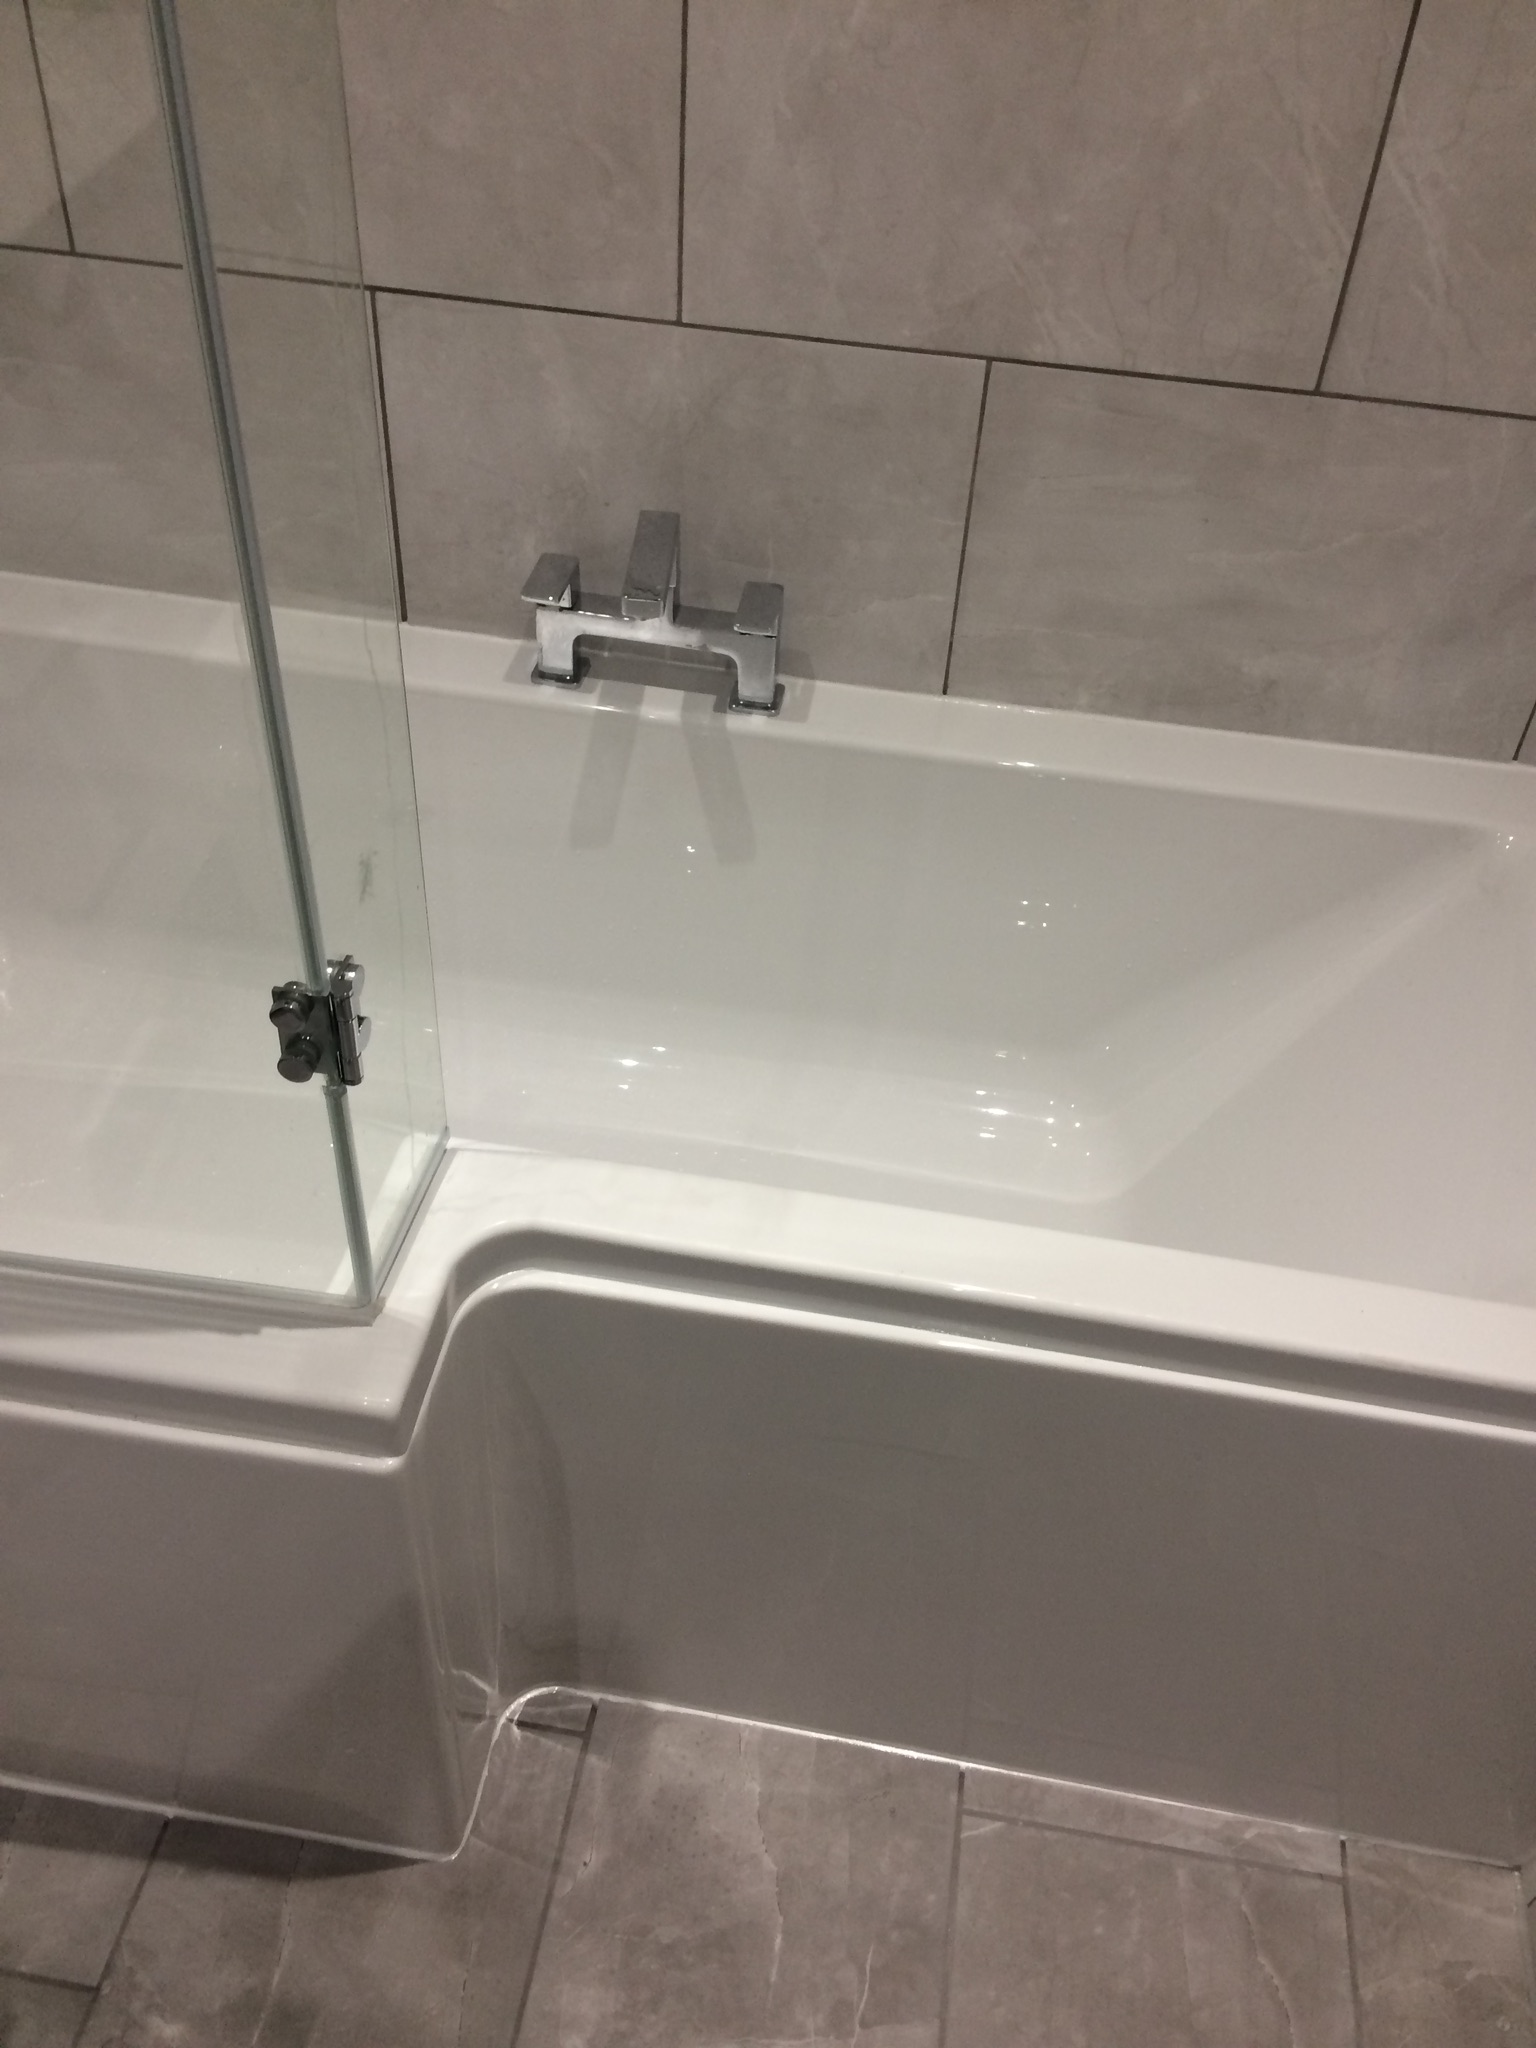 Bathrooms, Showers, Baths, Taps, Fitting, Installation